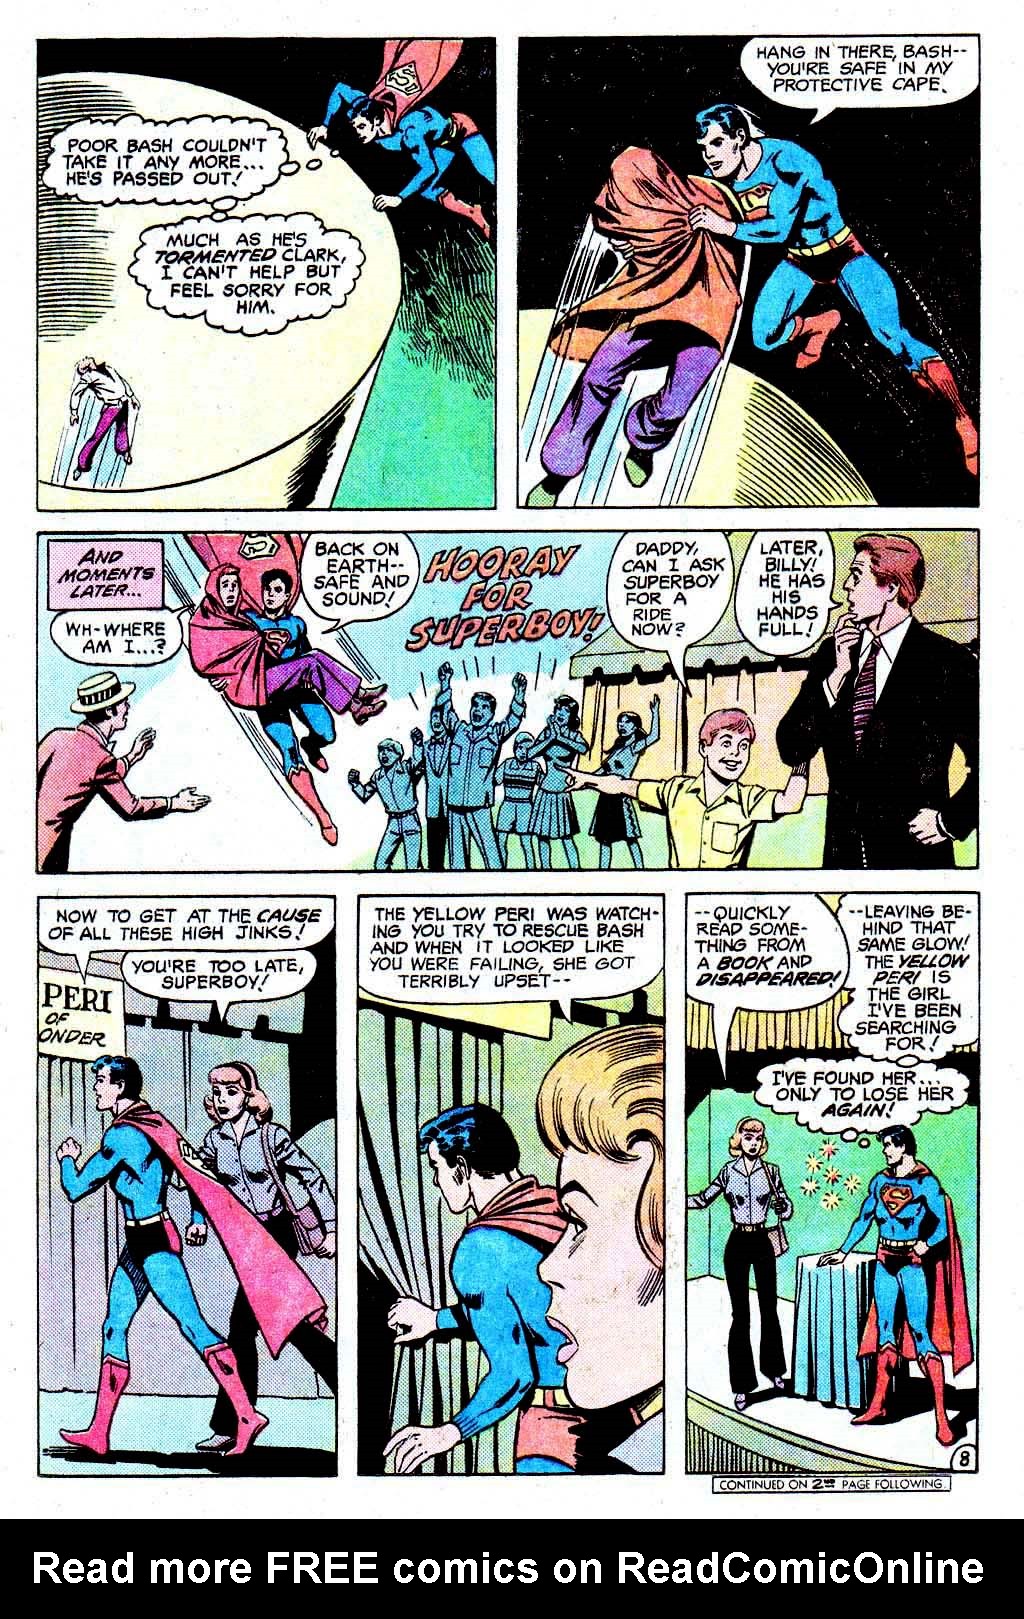 The New Adventures of Superboy 35 Page 11